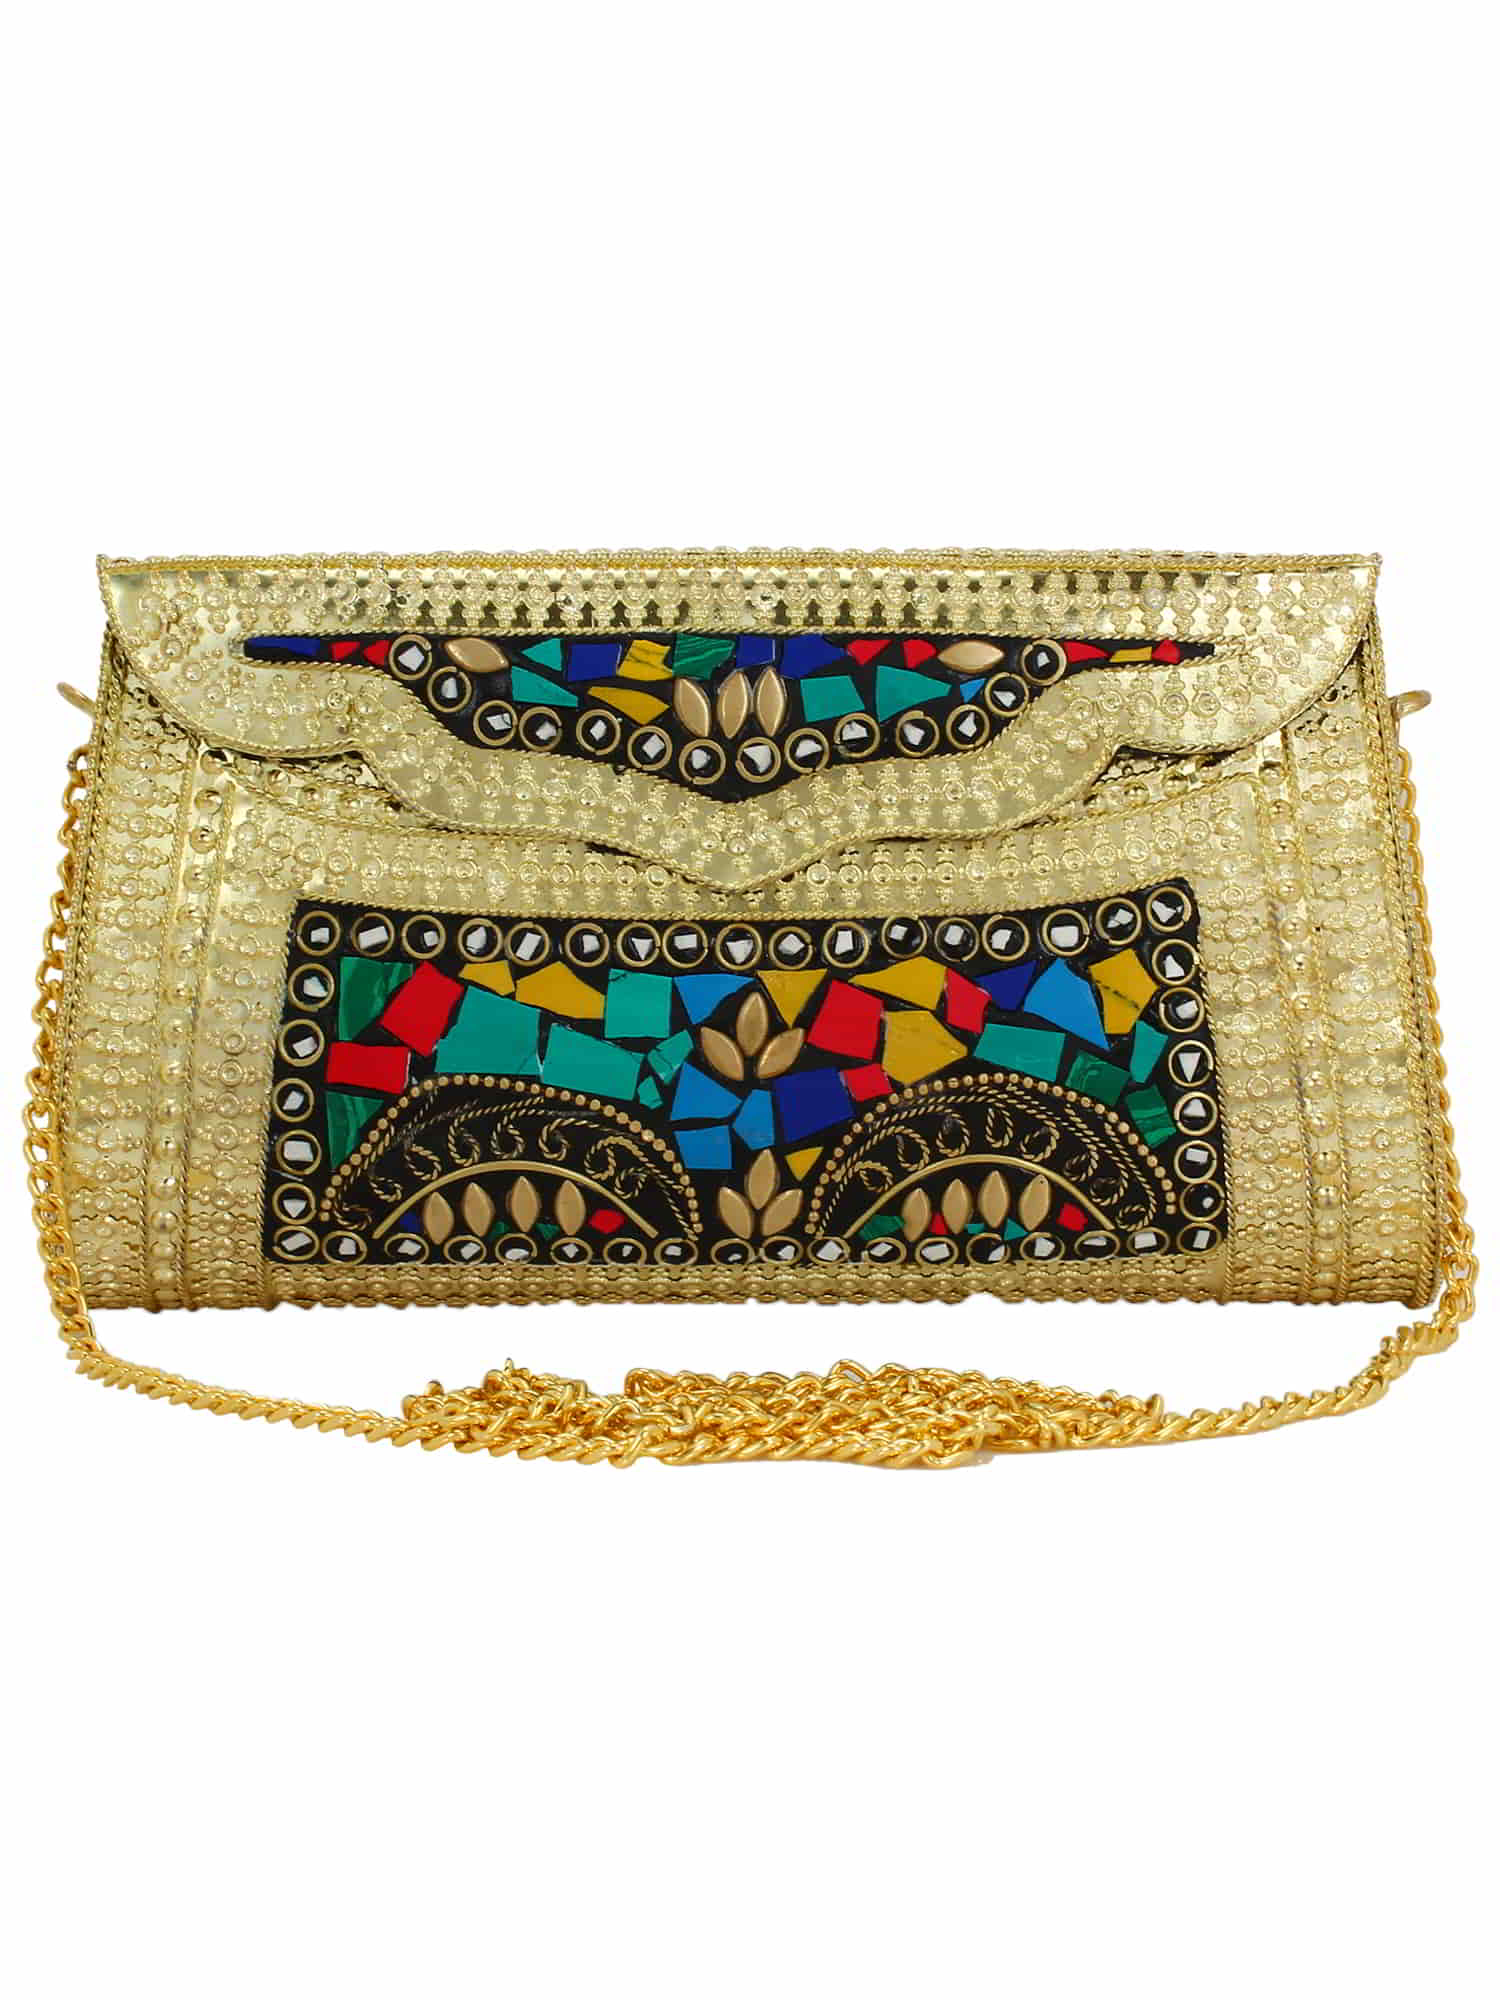 Jewel Mosaic Design and Embelished Party Clutch